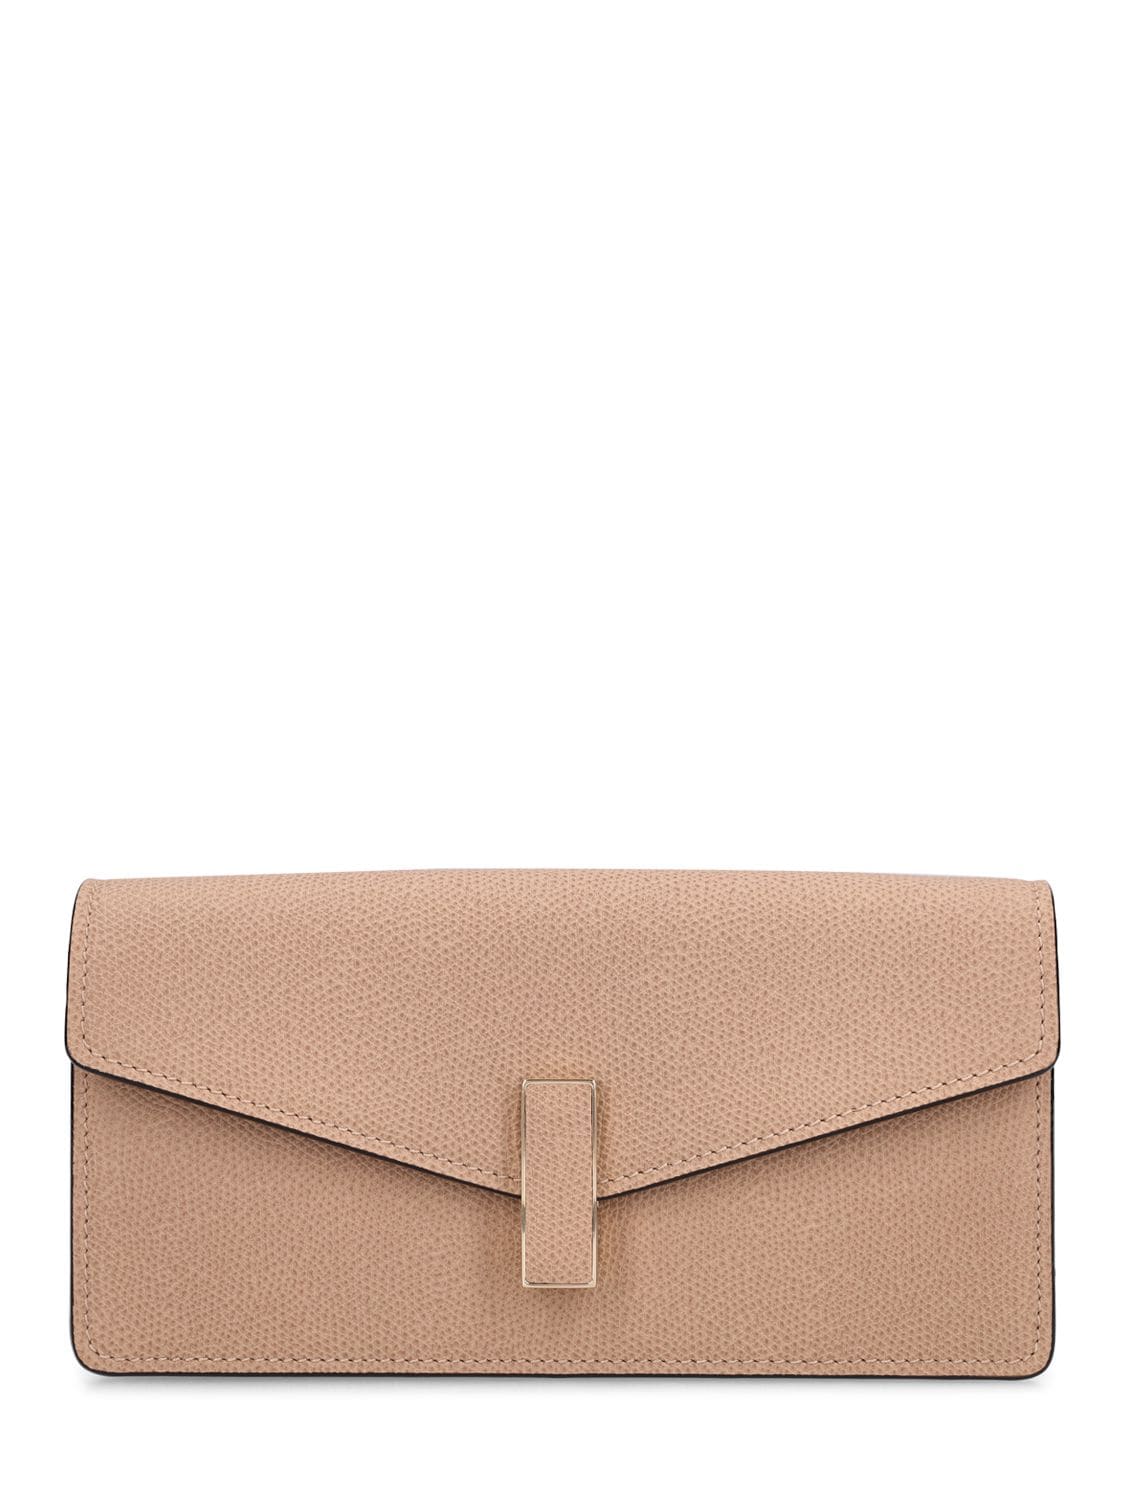 Valextra New Iside Clutch W/chain In Cachemire